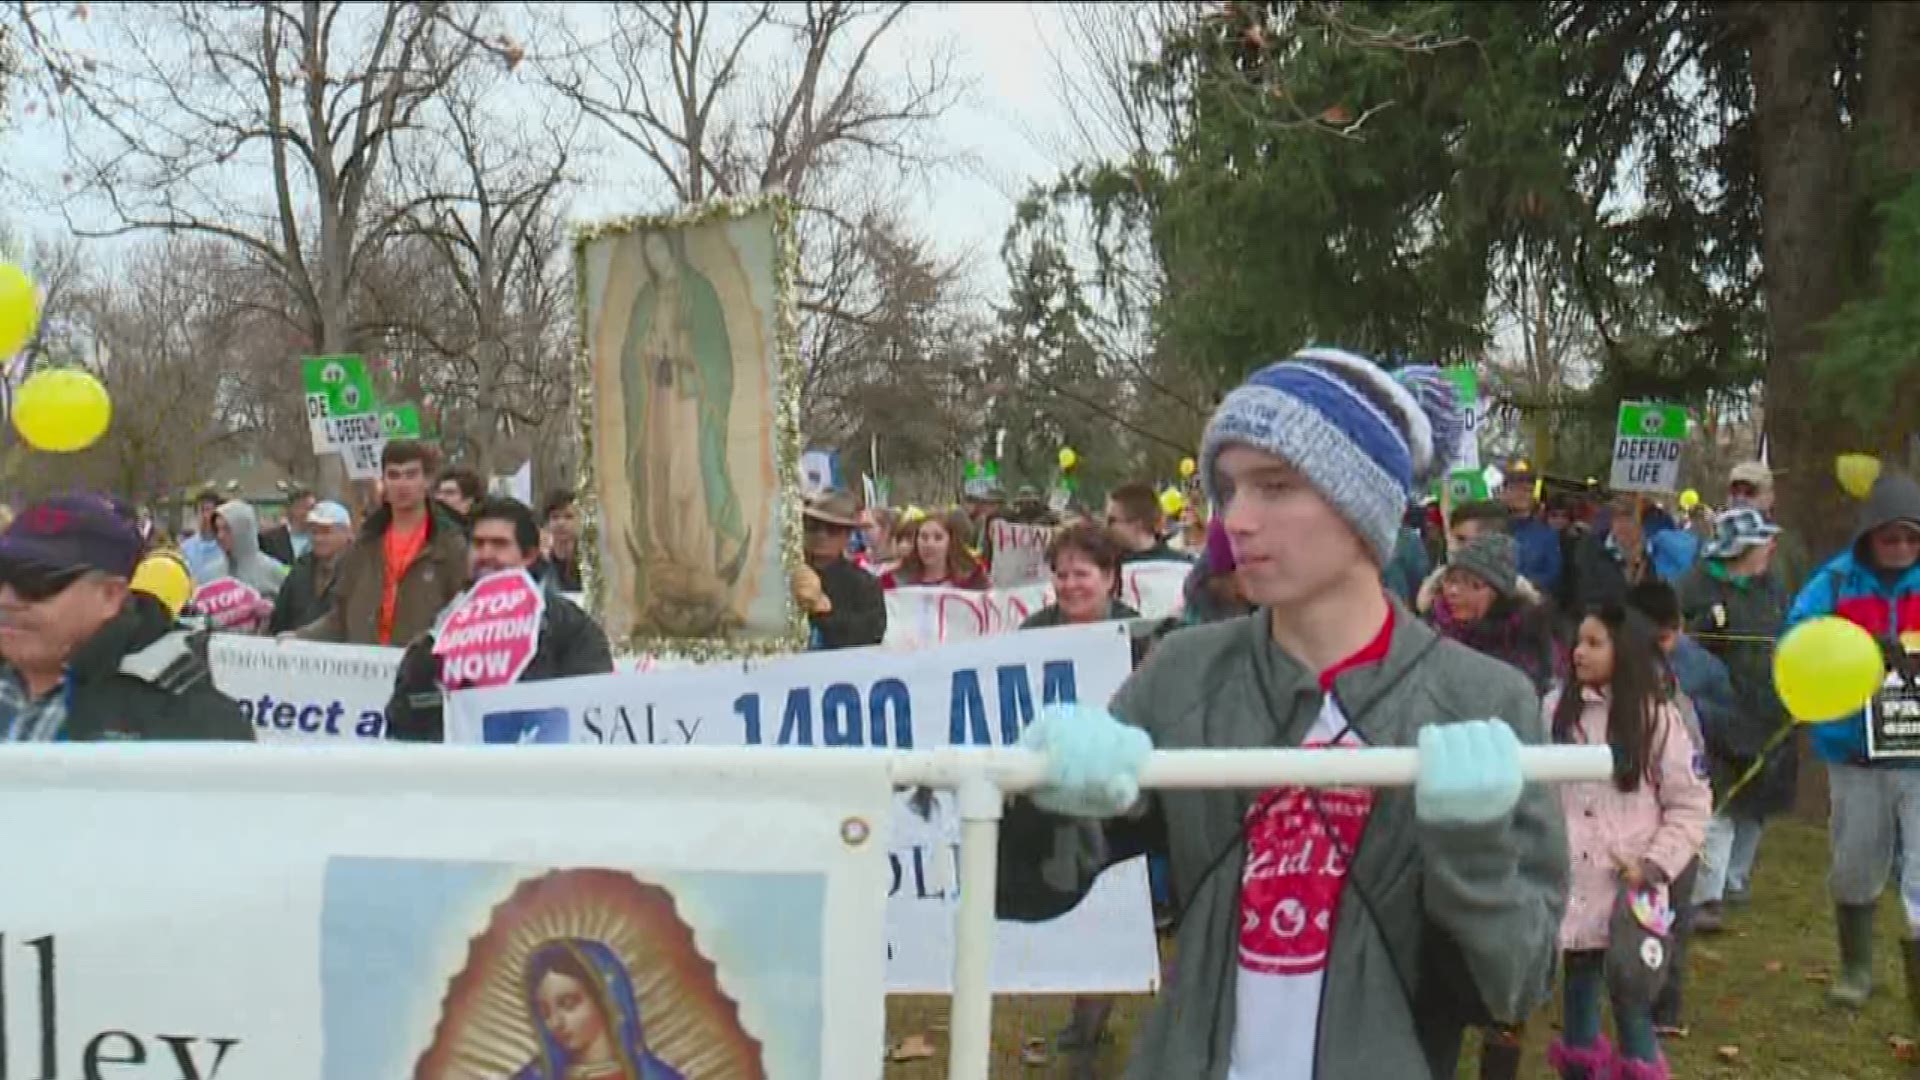 The March made its way from Julia Davis Park to the Statehouse on Saturday.